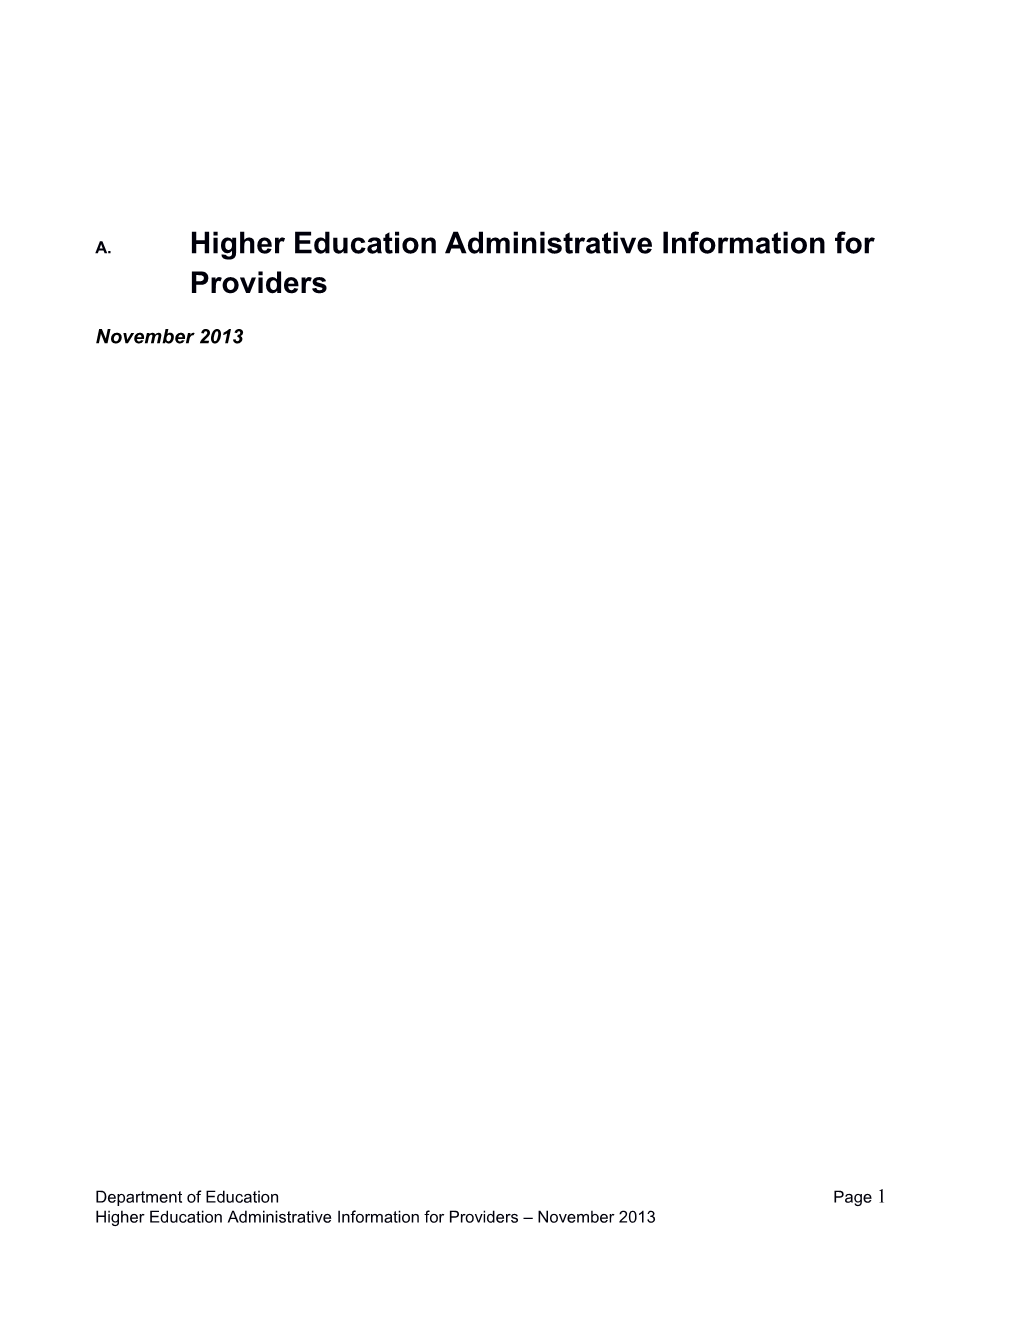 Higher Educationadministrative Information for Providers